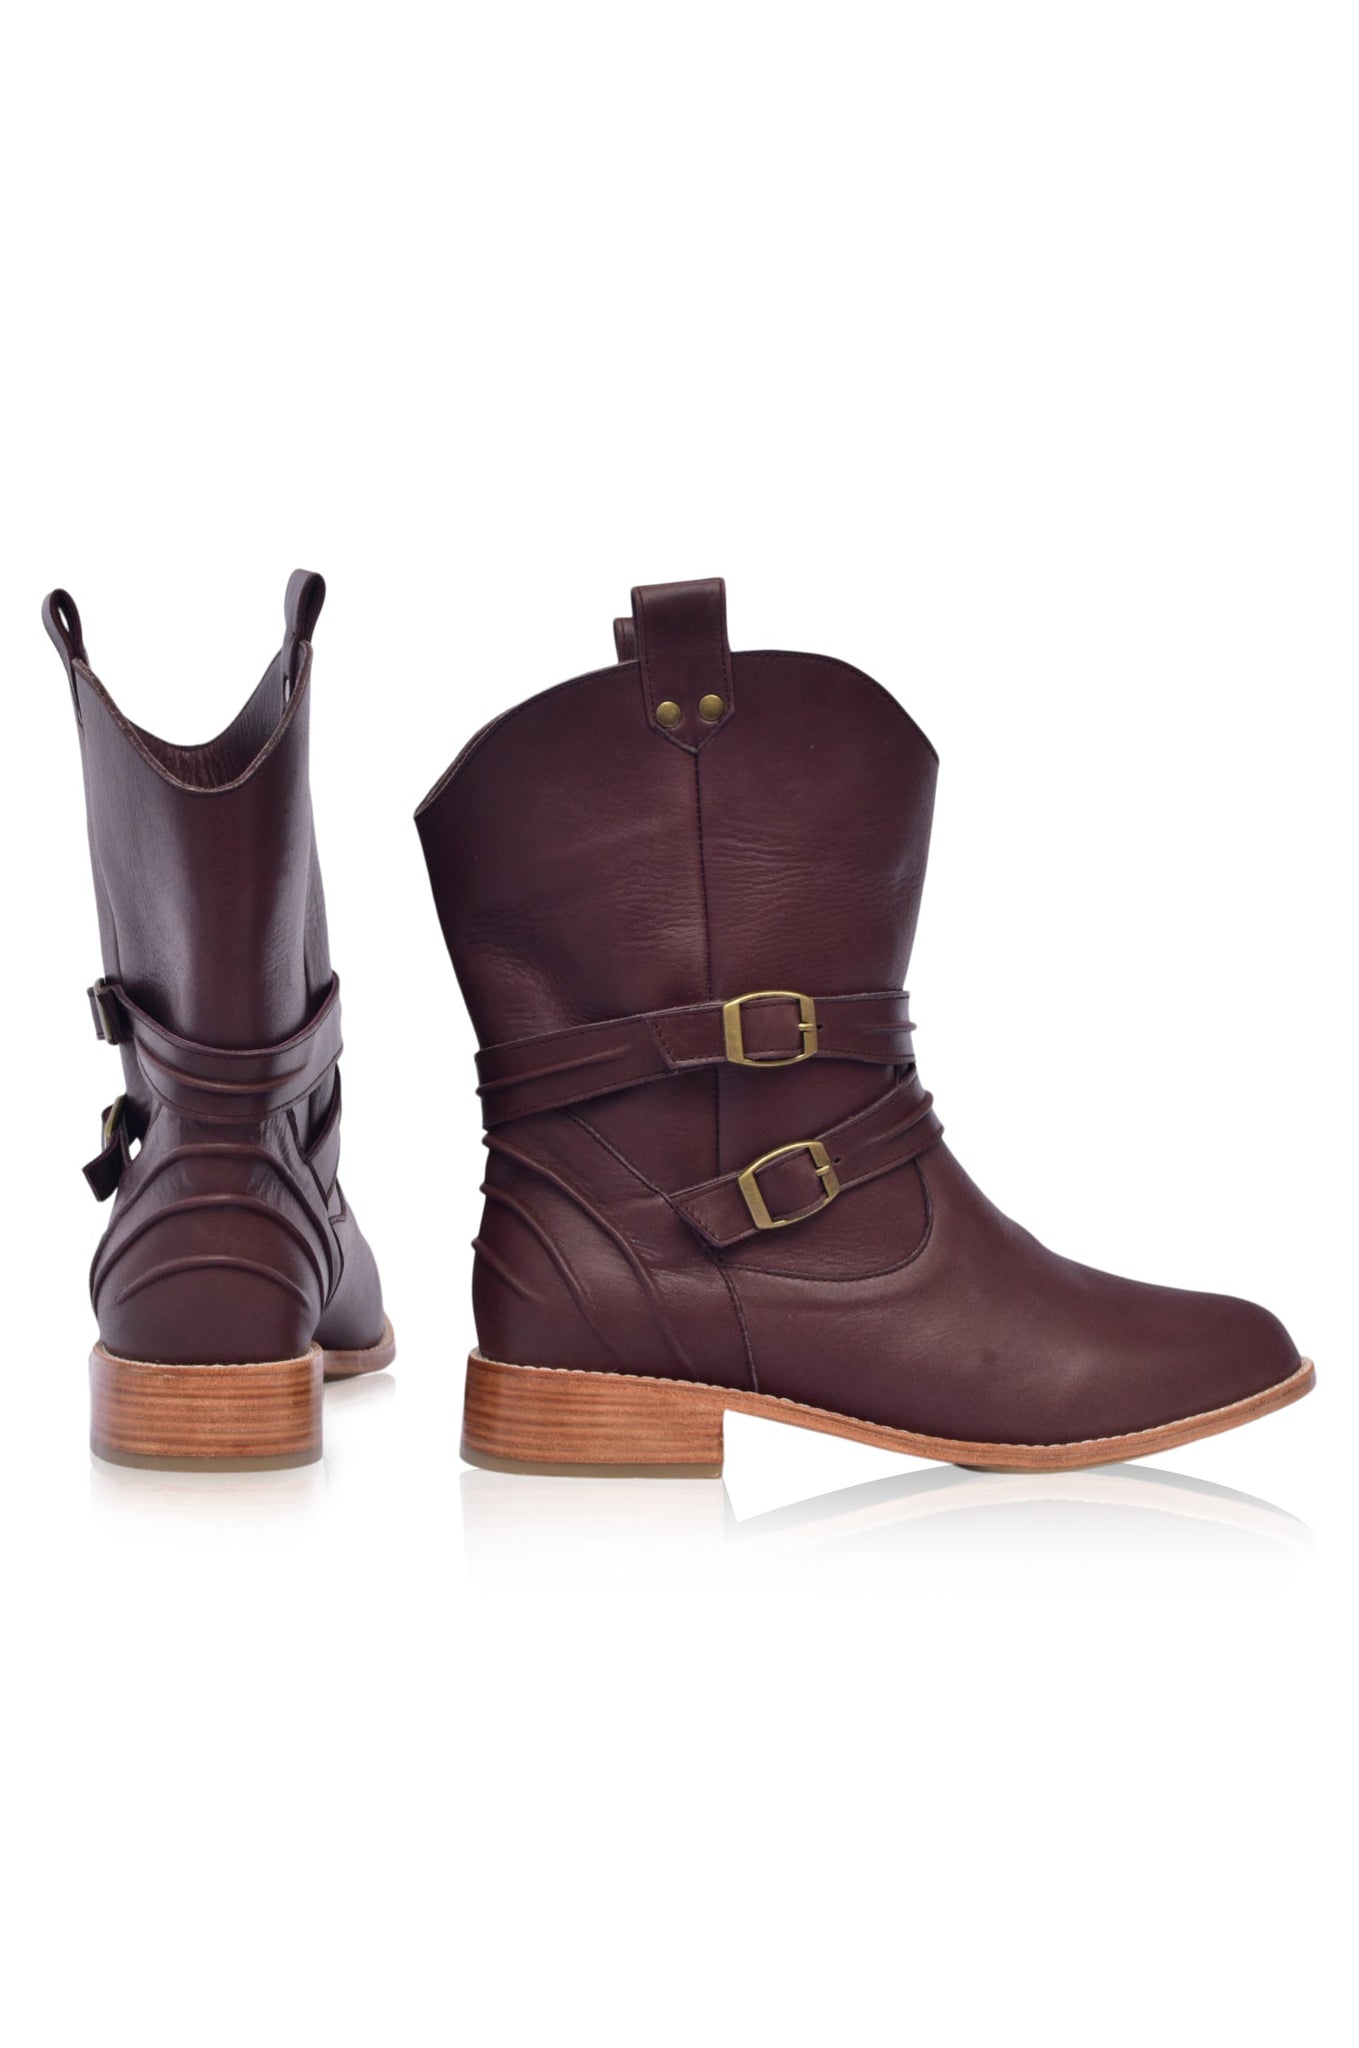 Barcelona Leather Boots (Sz. 7 & 9) by ELF